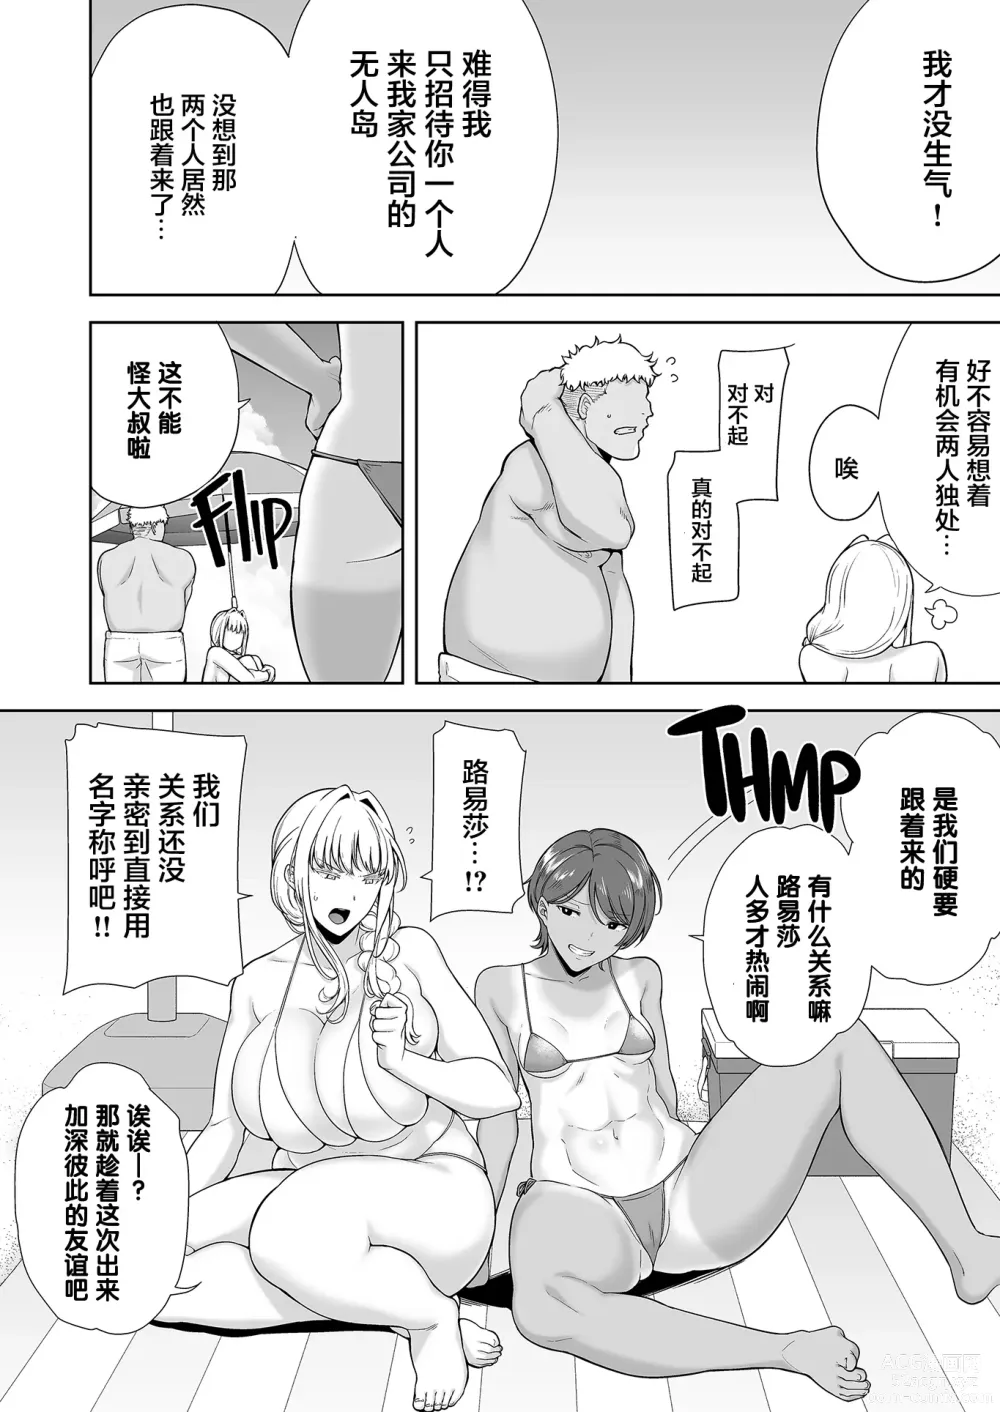 Page 8 of doujinshi 聖華女学院高等部公認竿おじさん 6